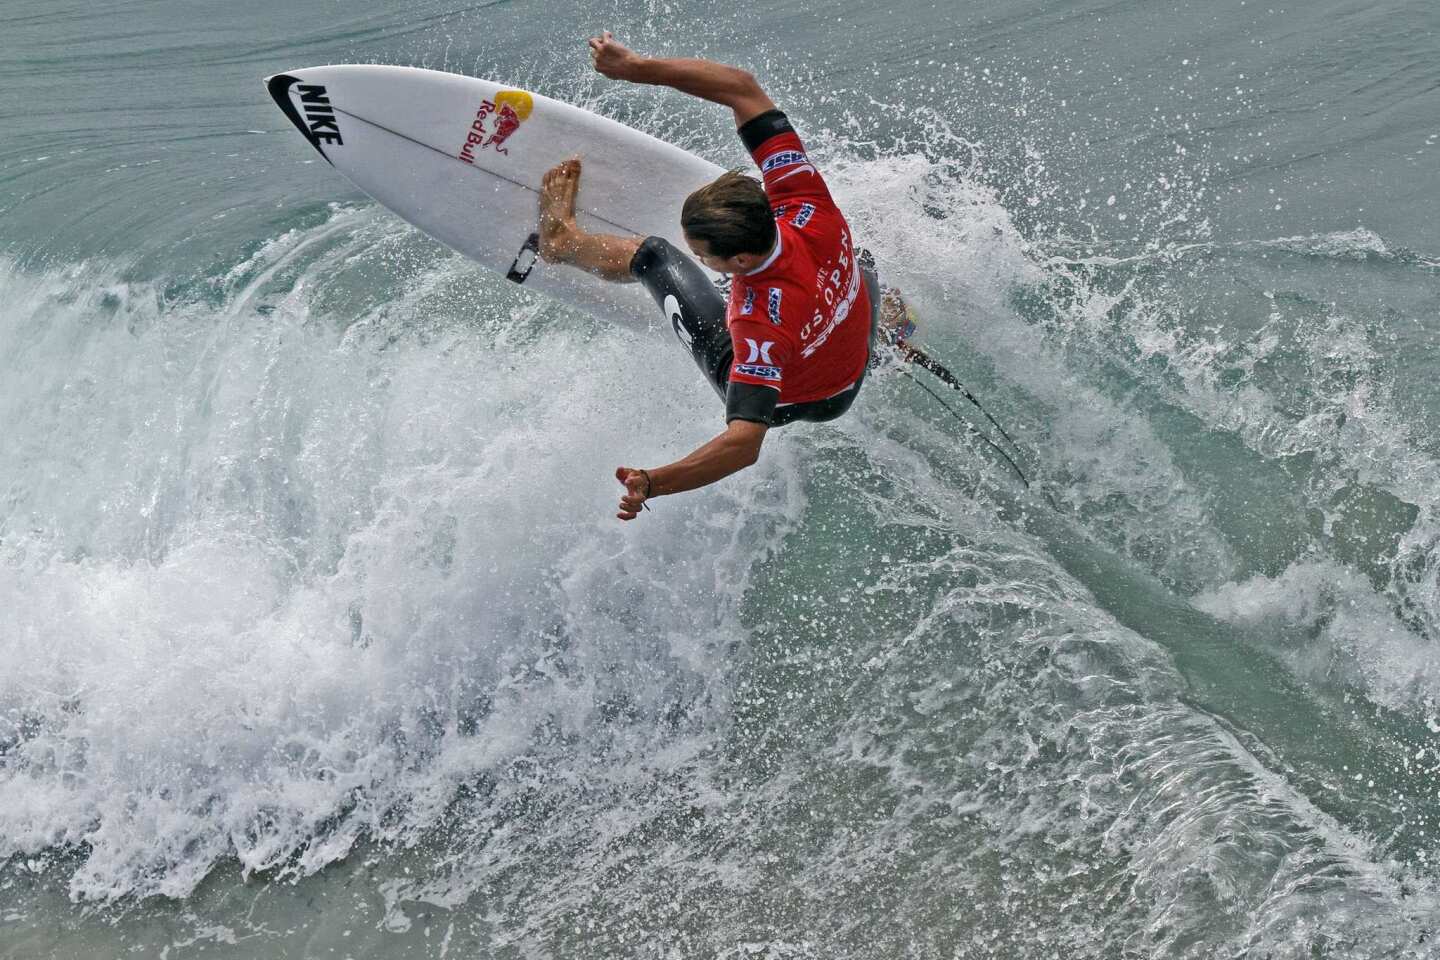 Julian Wilson of Australia shows his skills at the competition.